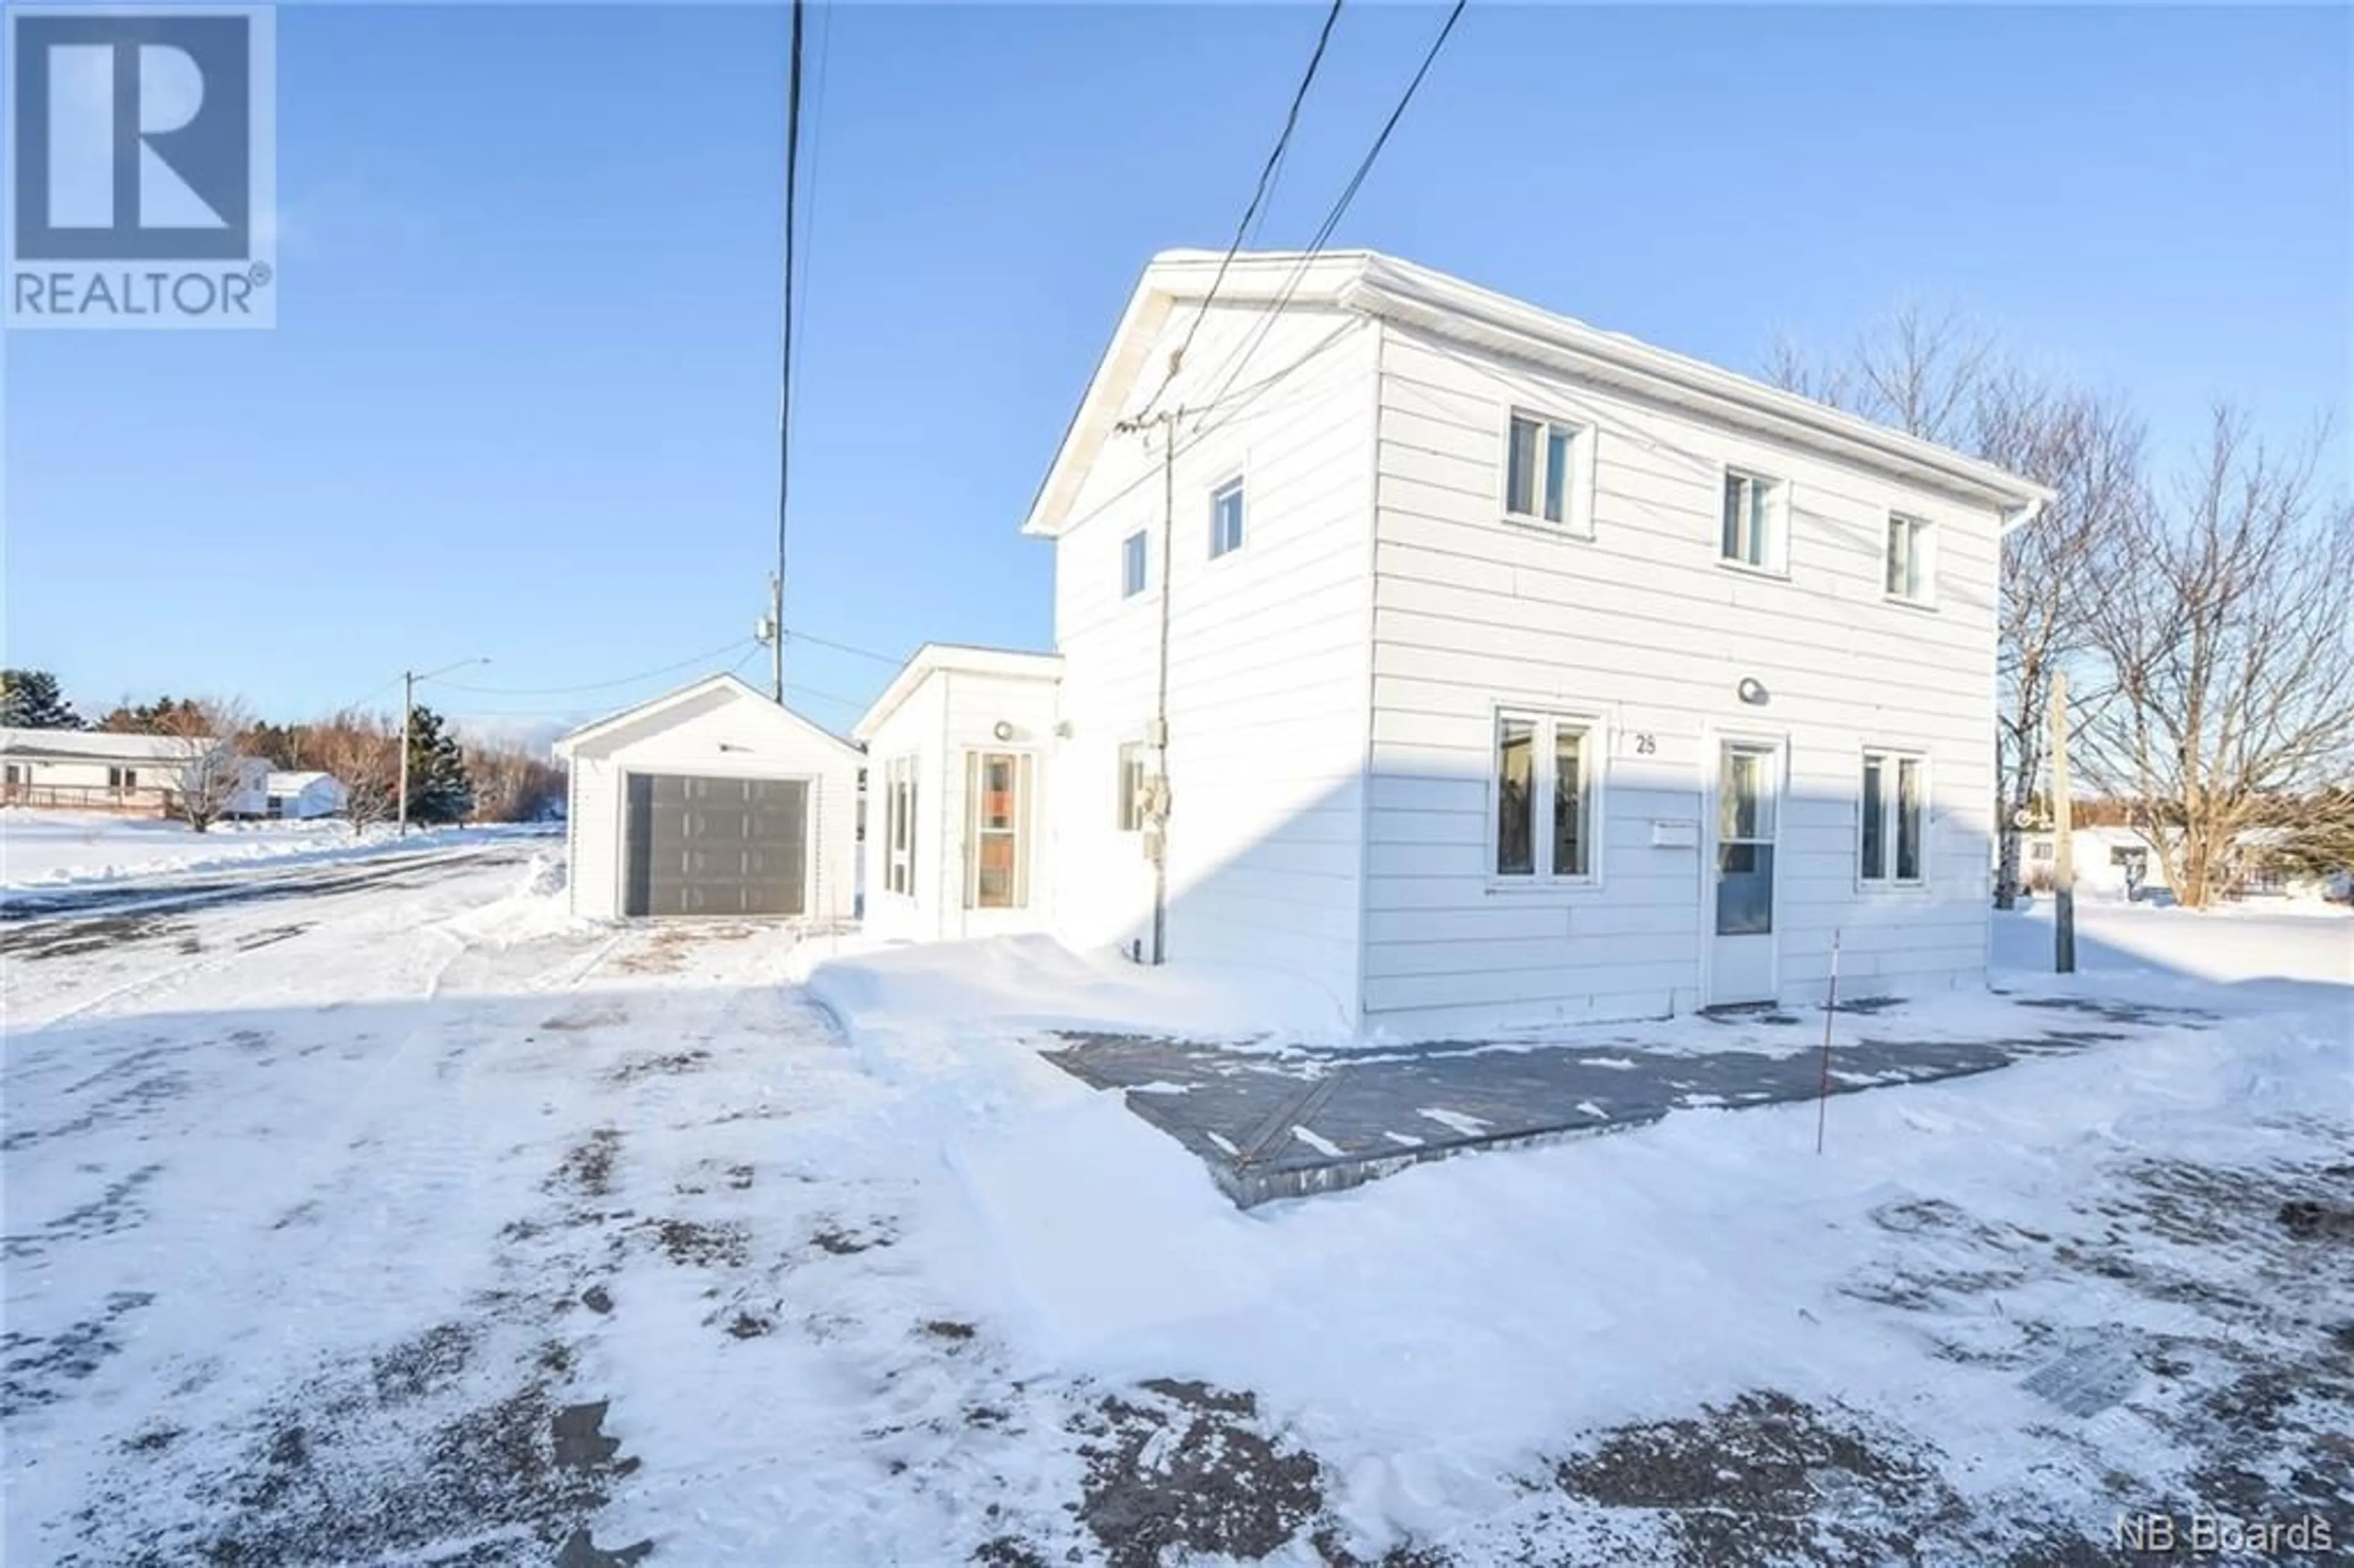 Home with unknown exterior material for 28 Rue Des Chasseurs, Le Goulet New Brunswick E8S1Z8